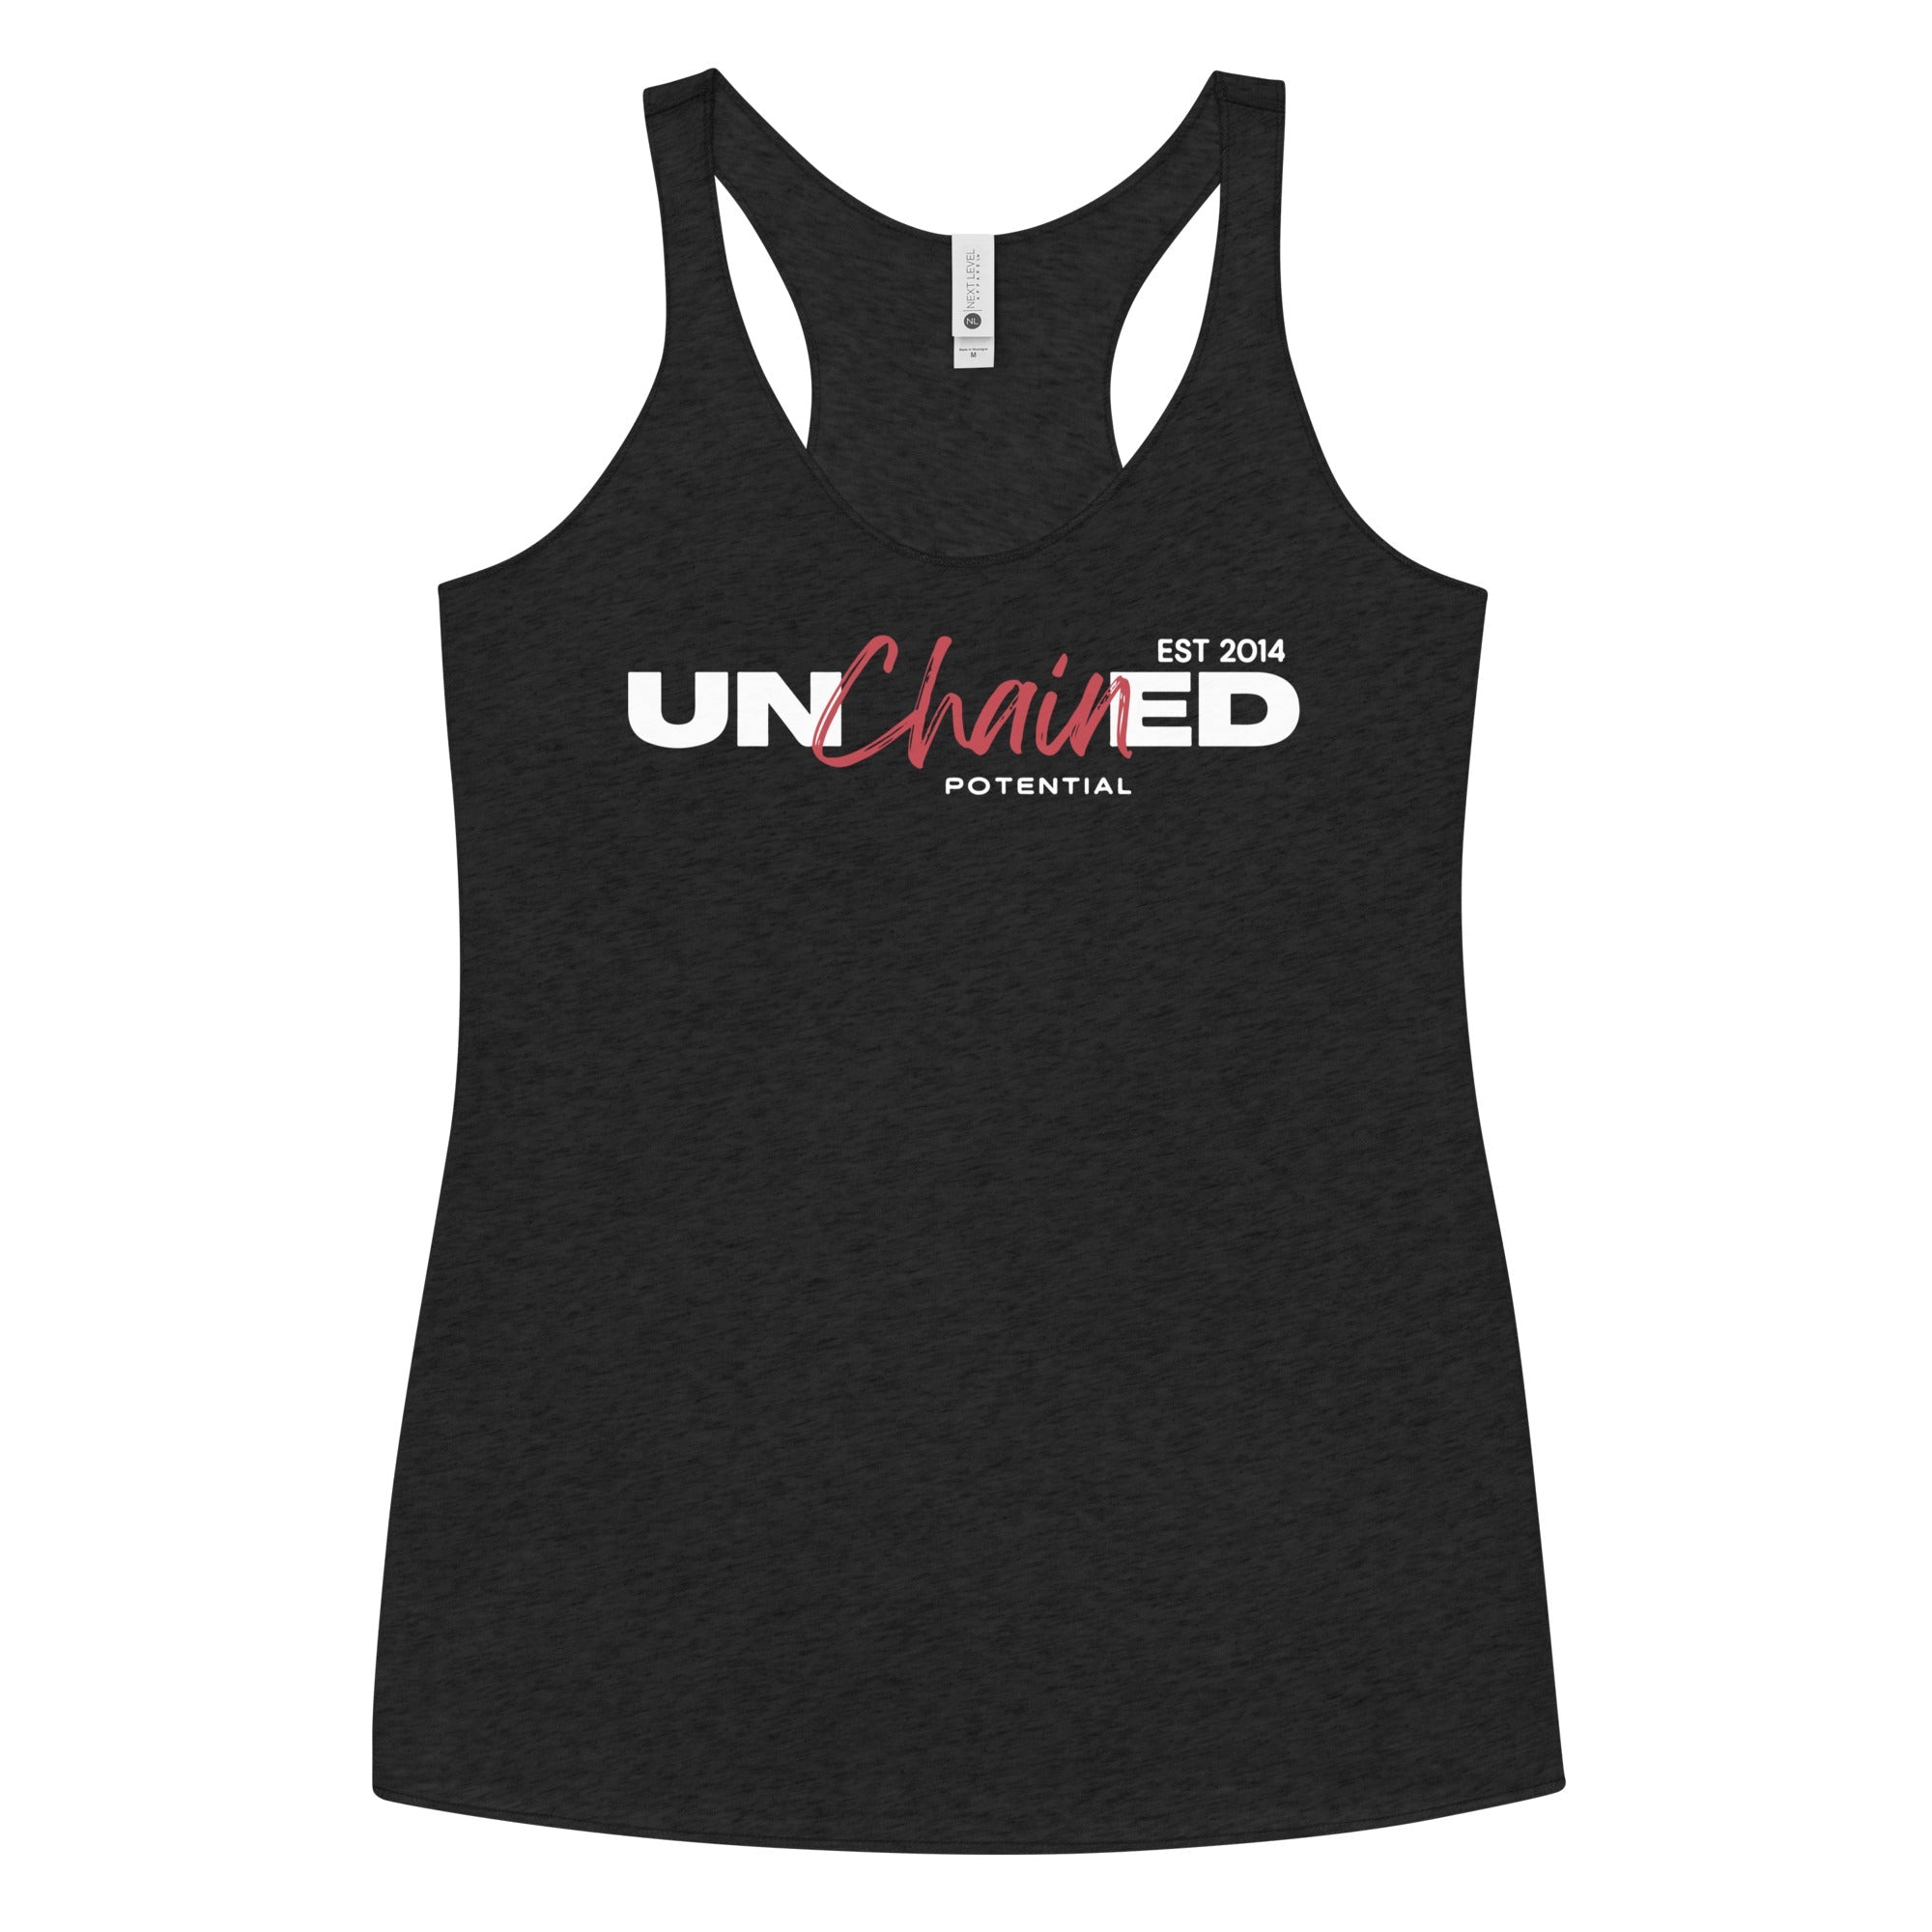 Unchained Potential Women's Racerback Tank v2